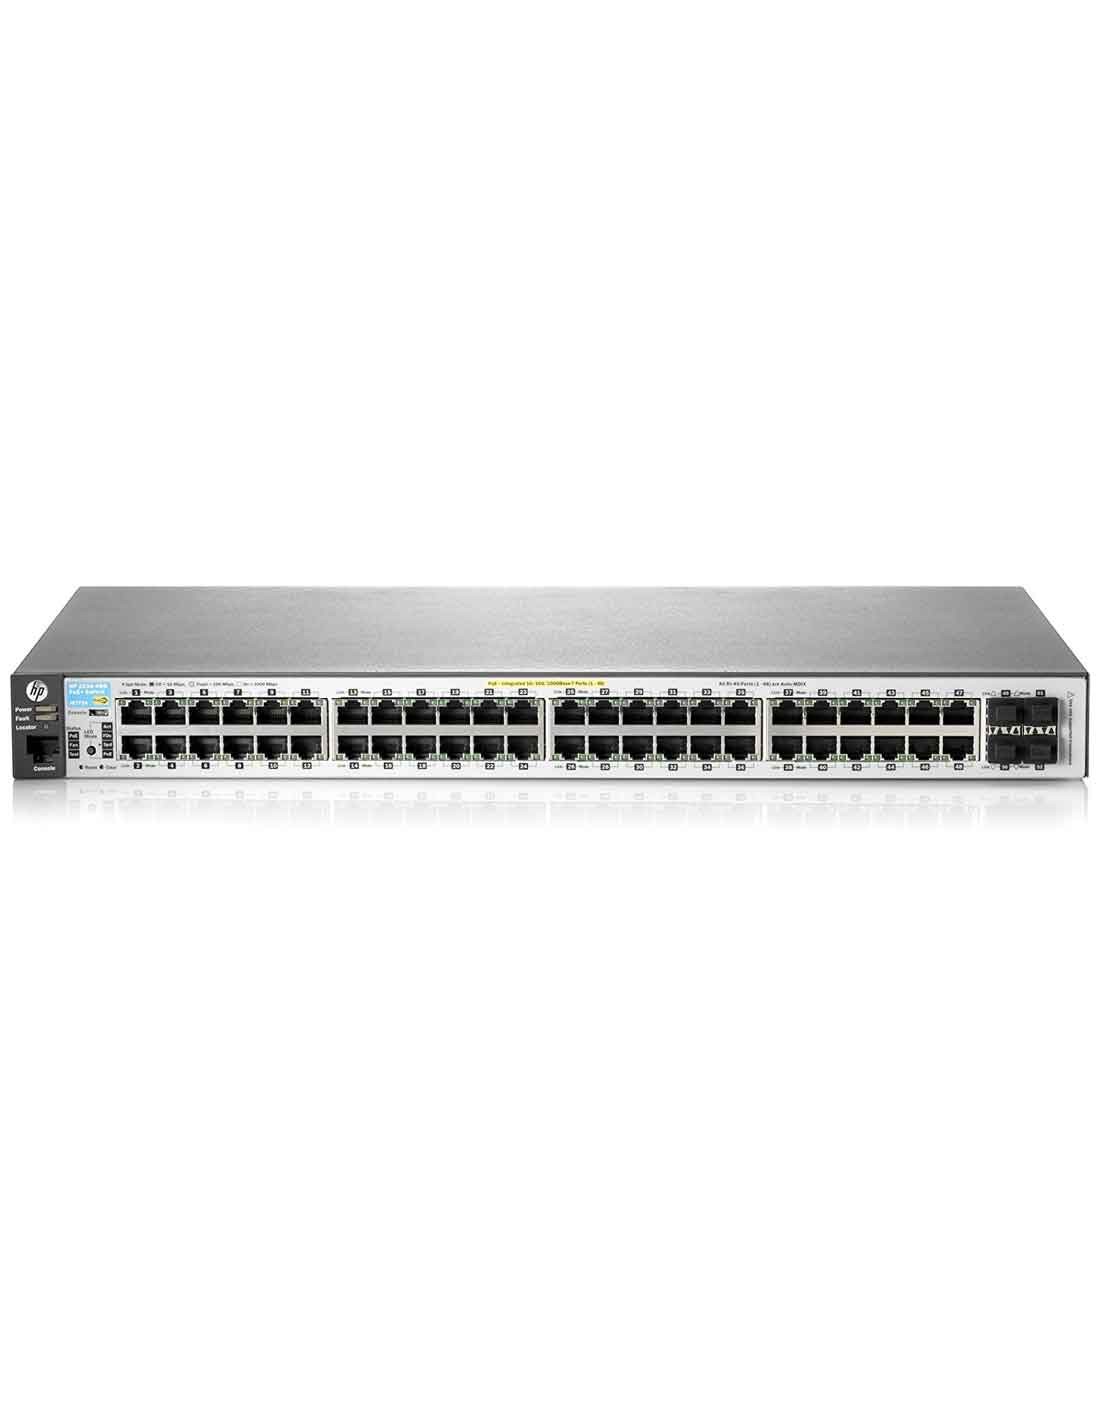 Aruba 2530 48 PoE+ Switch J9778A at a cheap price and free delivery in Dubai